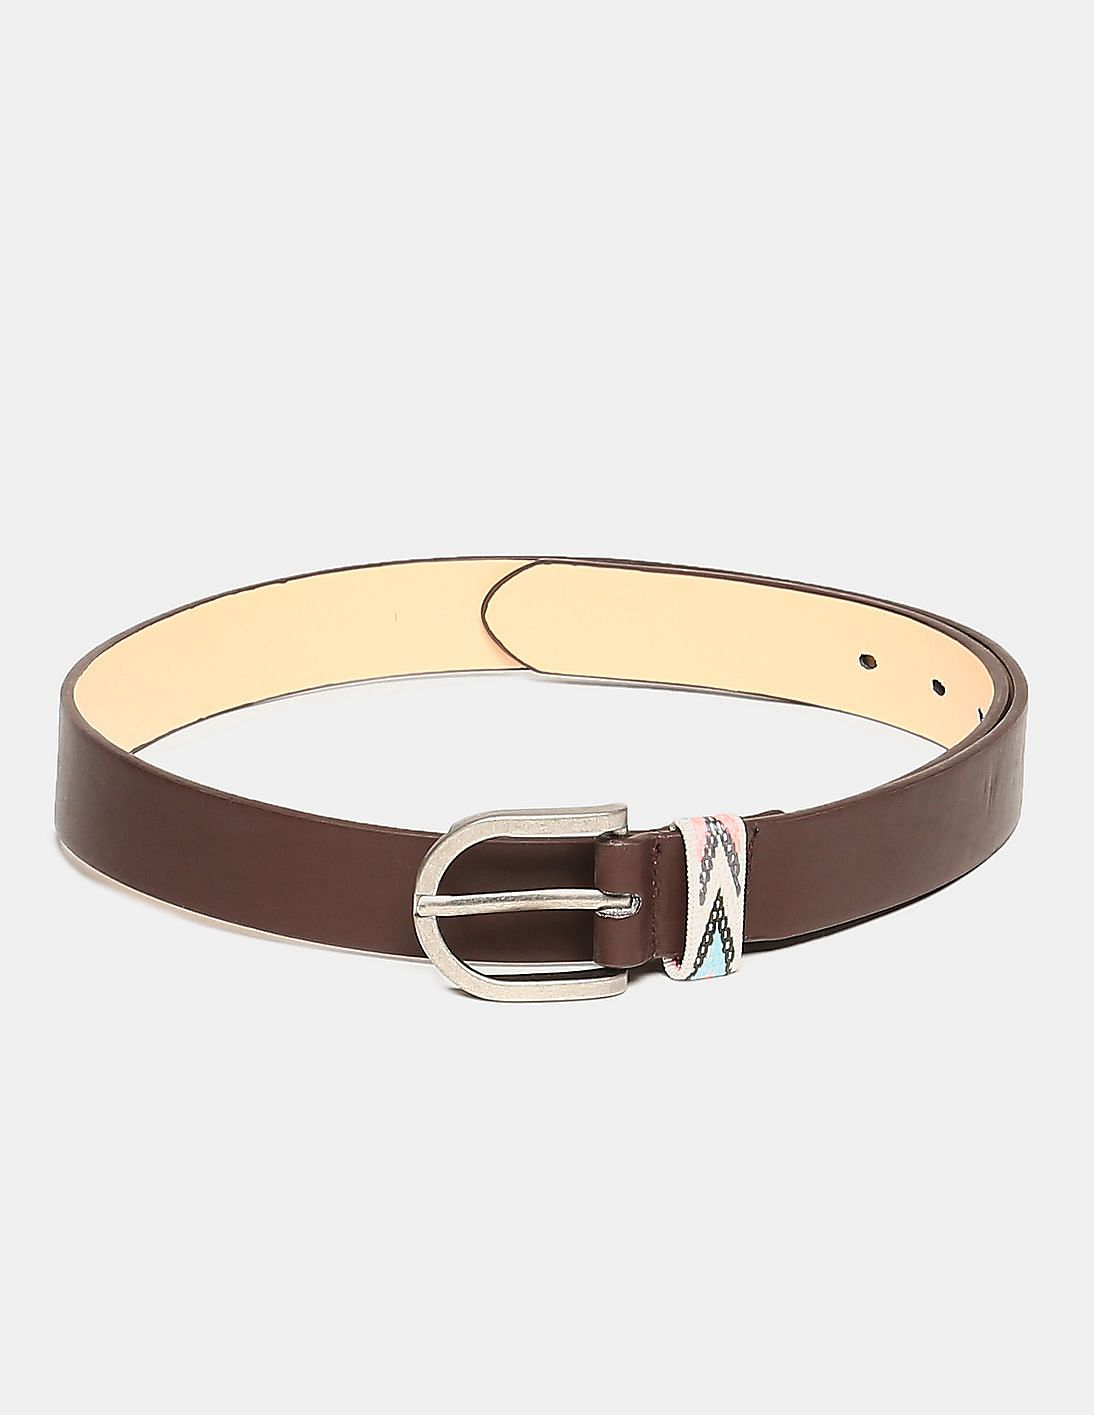 70% Off on Belt Starts from Rs. 60